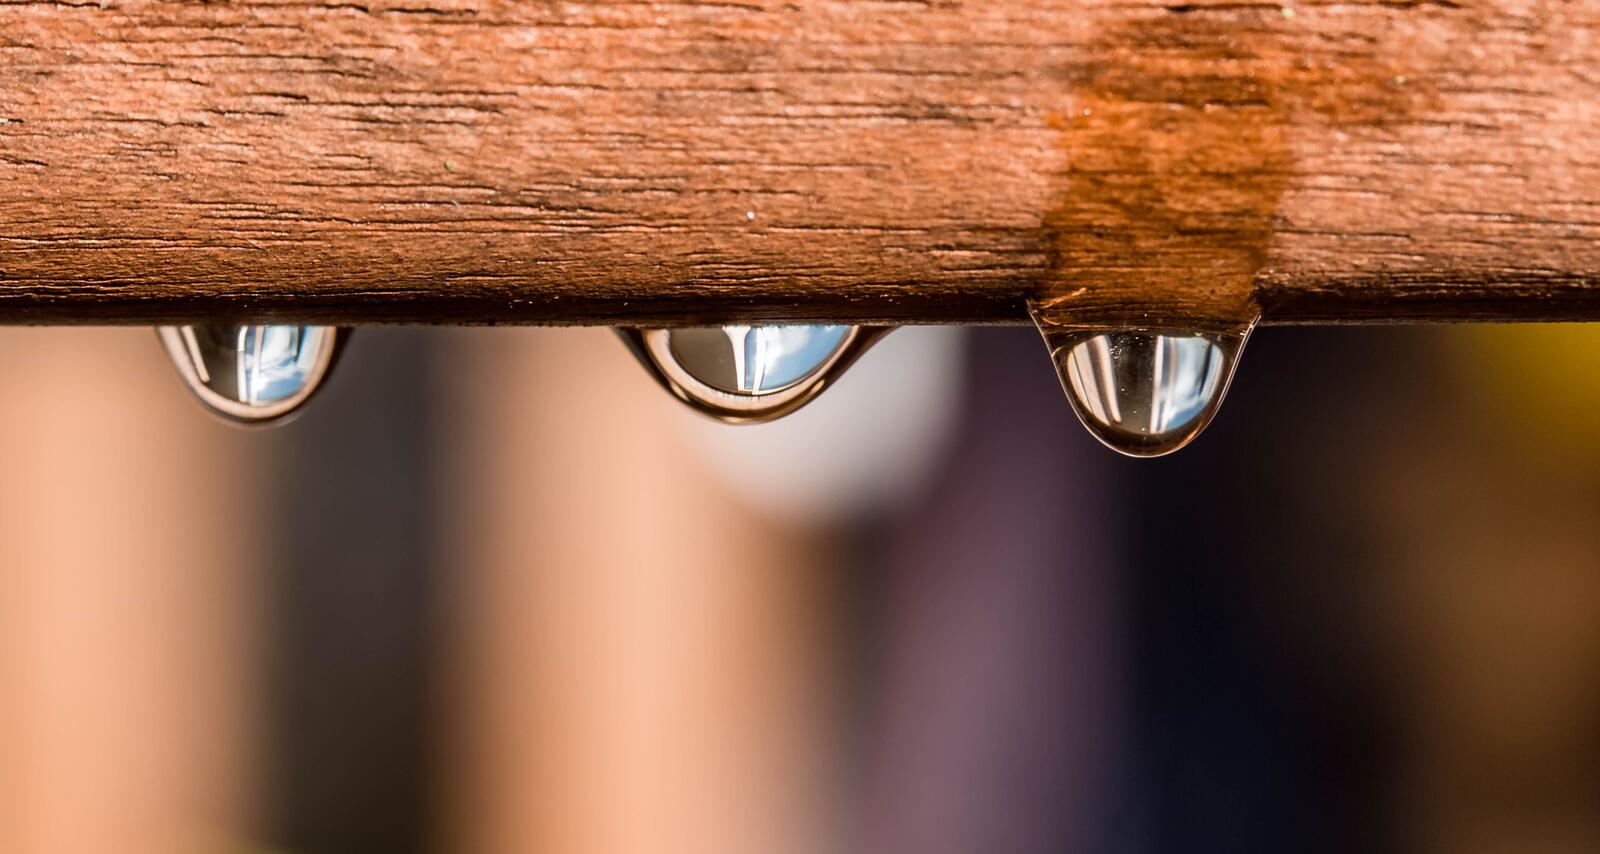 Free photo Water droplets hanging from the wooden surface